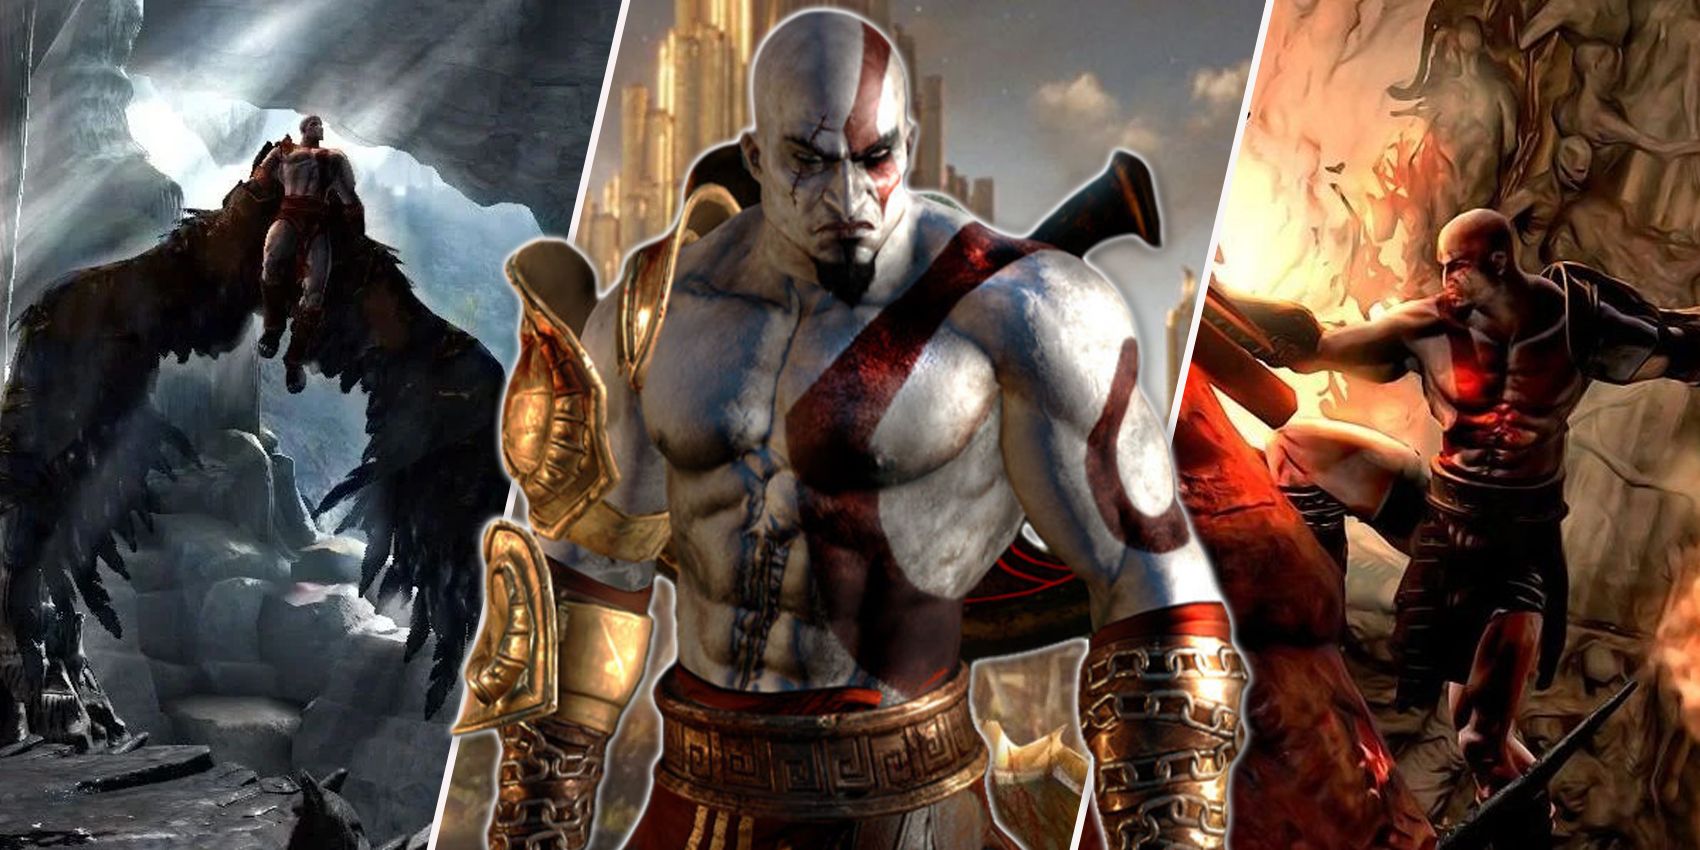 Could Hercules potentially be as strong as Kratos? How would